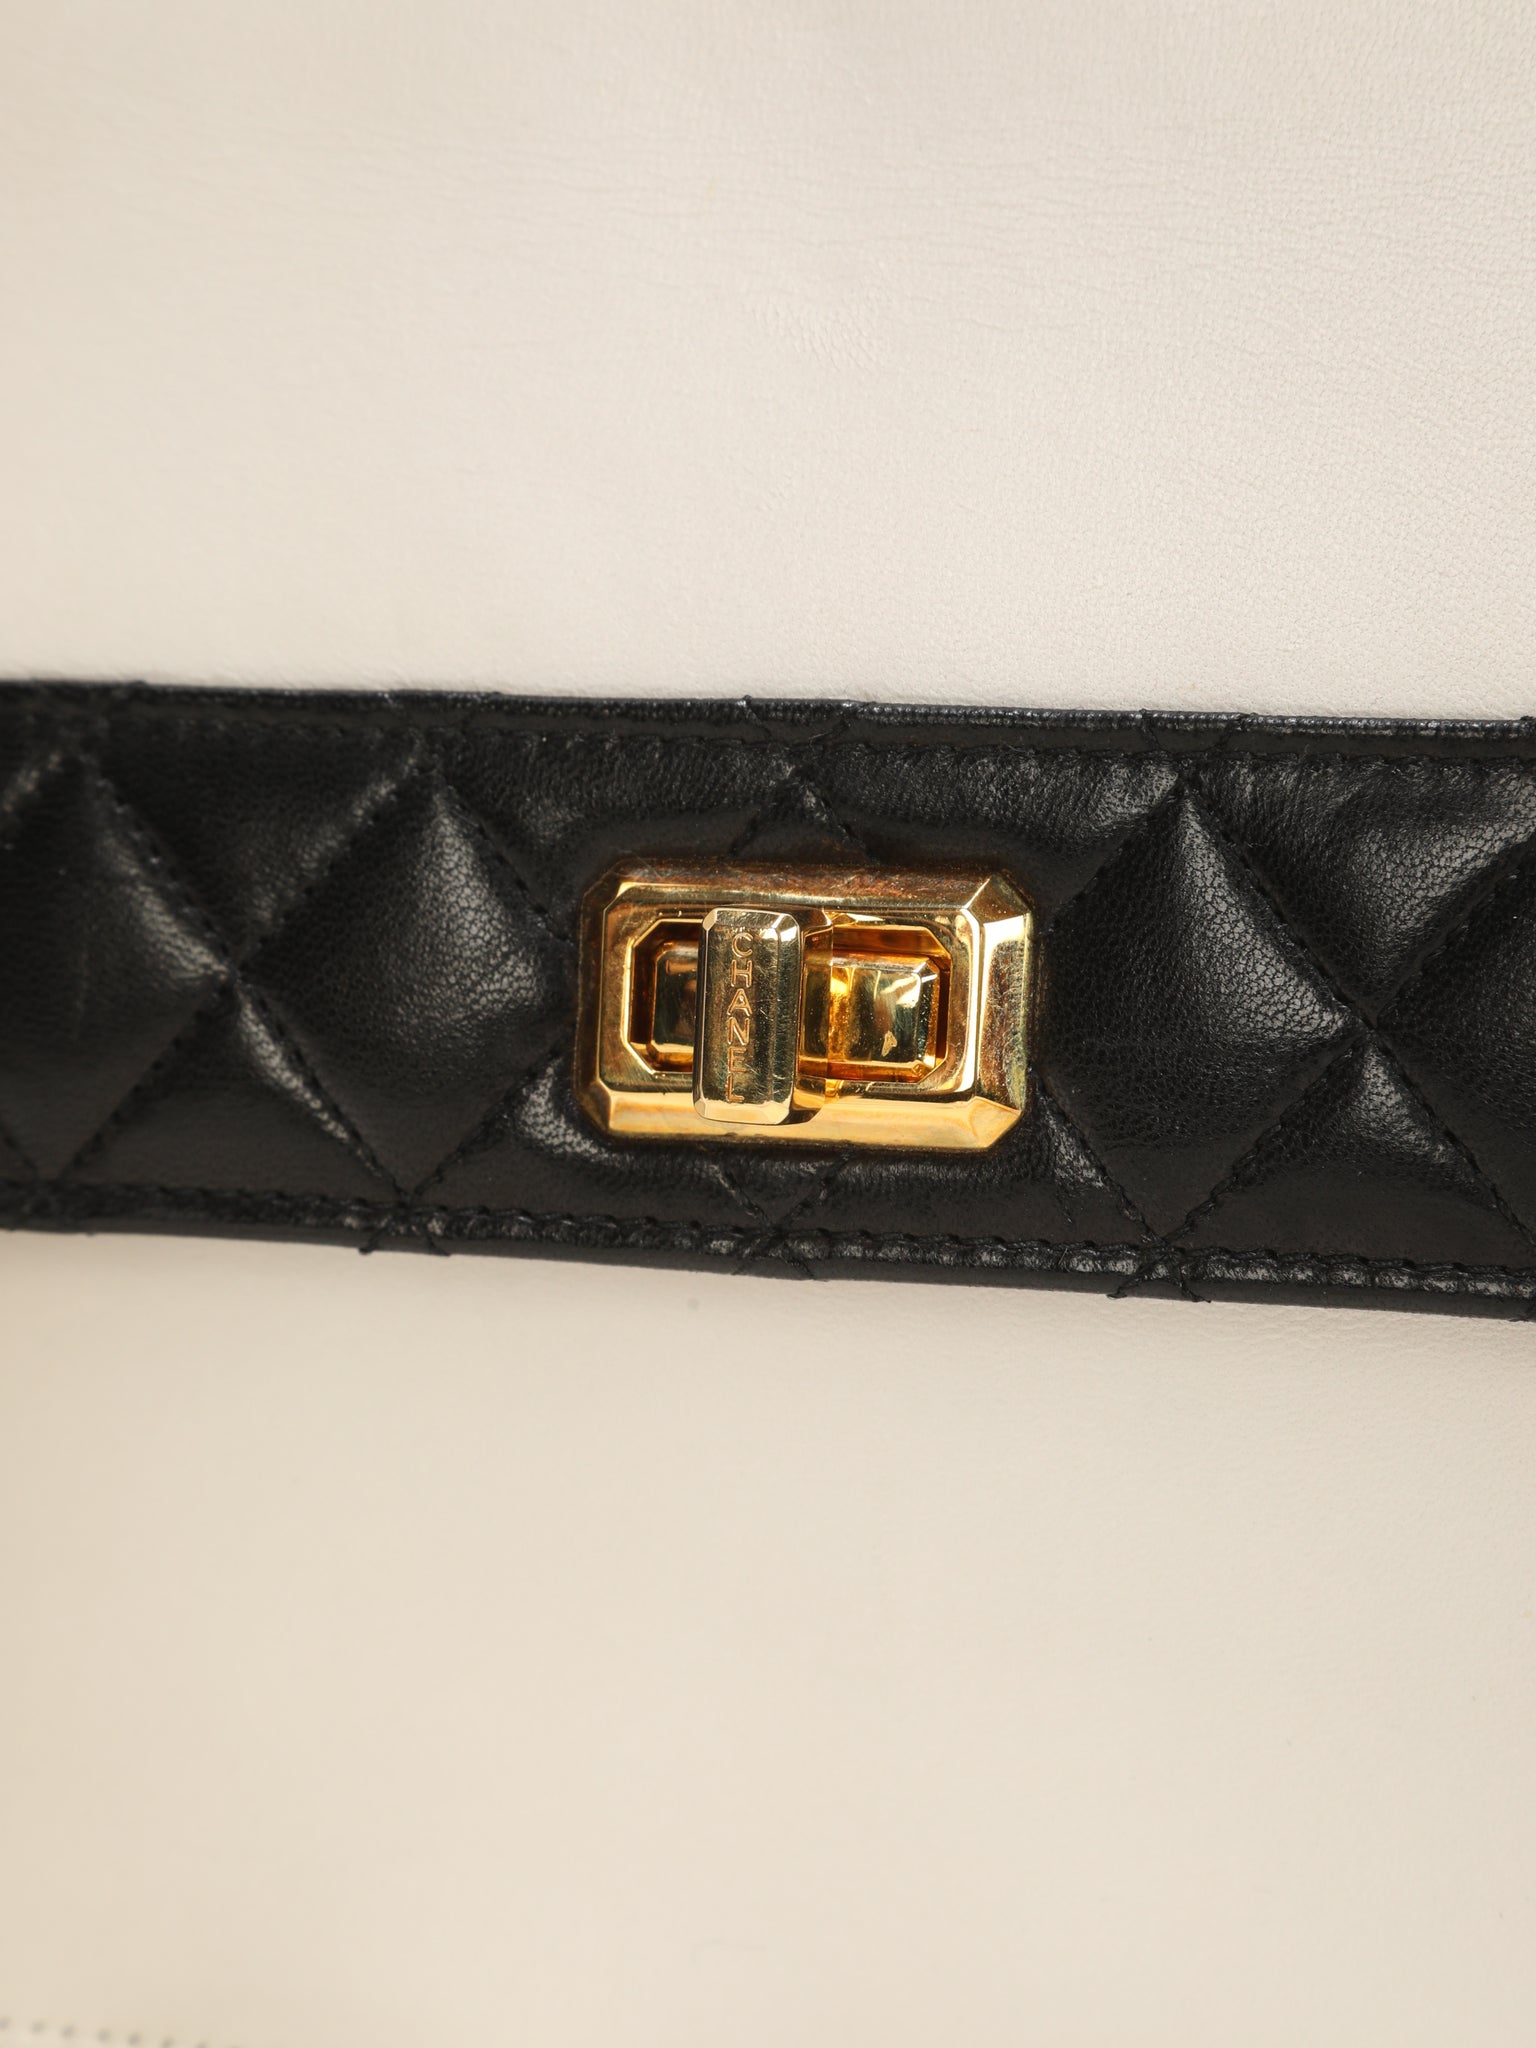 Rare Chanel Lambskin Trapezoid and Wallet